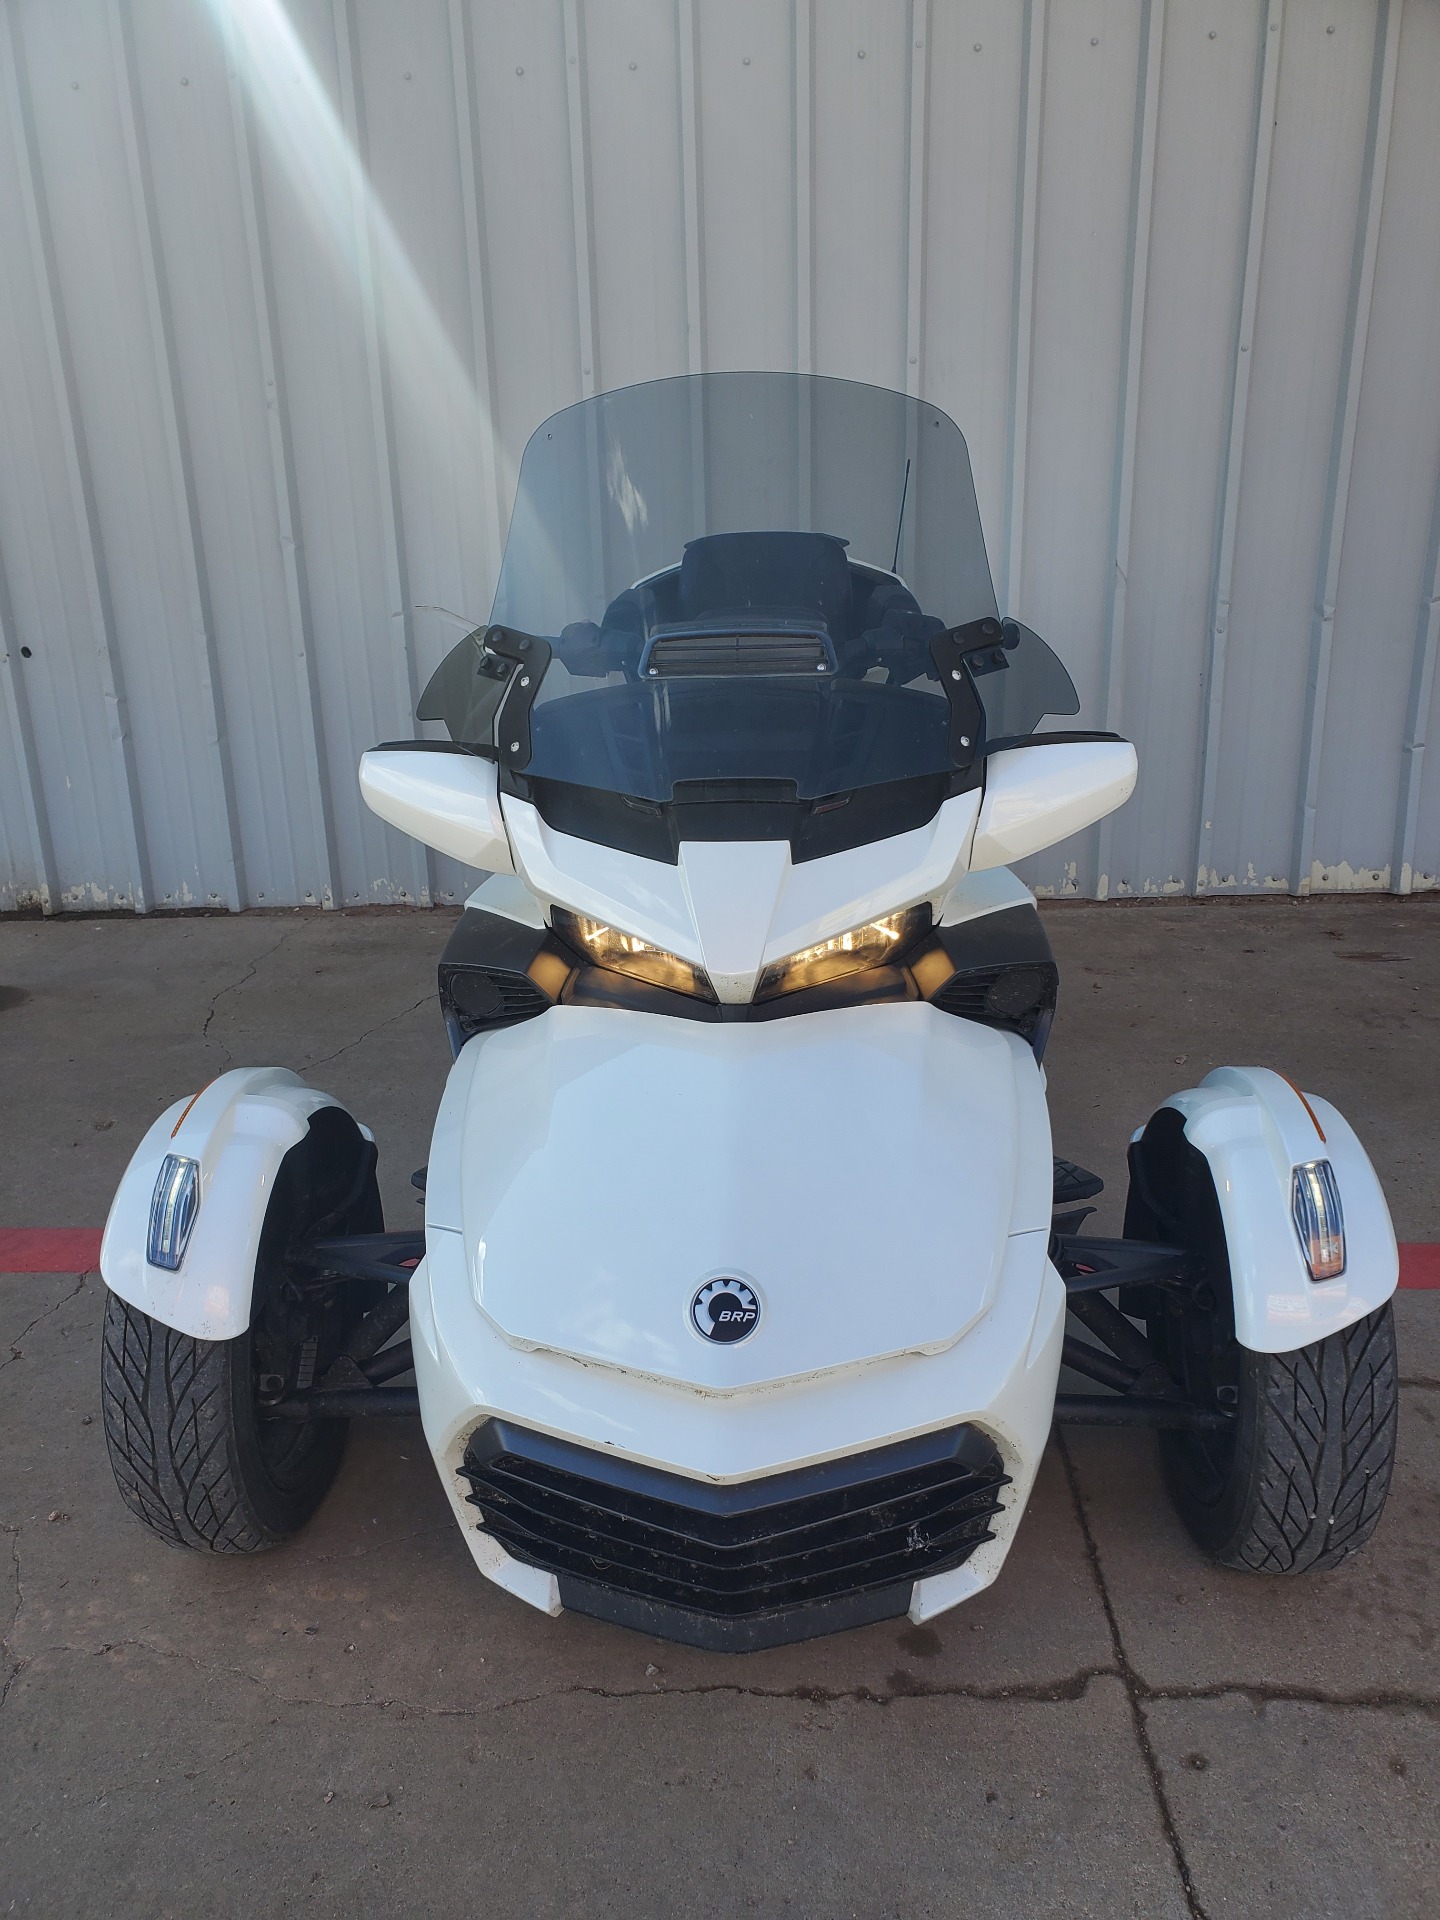 2019 Can-Am Spyder F3 Limited in Amarillo, Texas - Photo 4